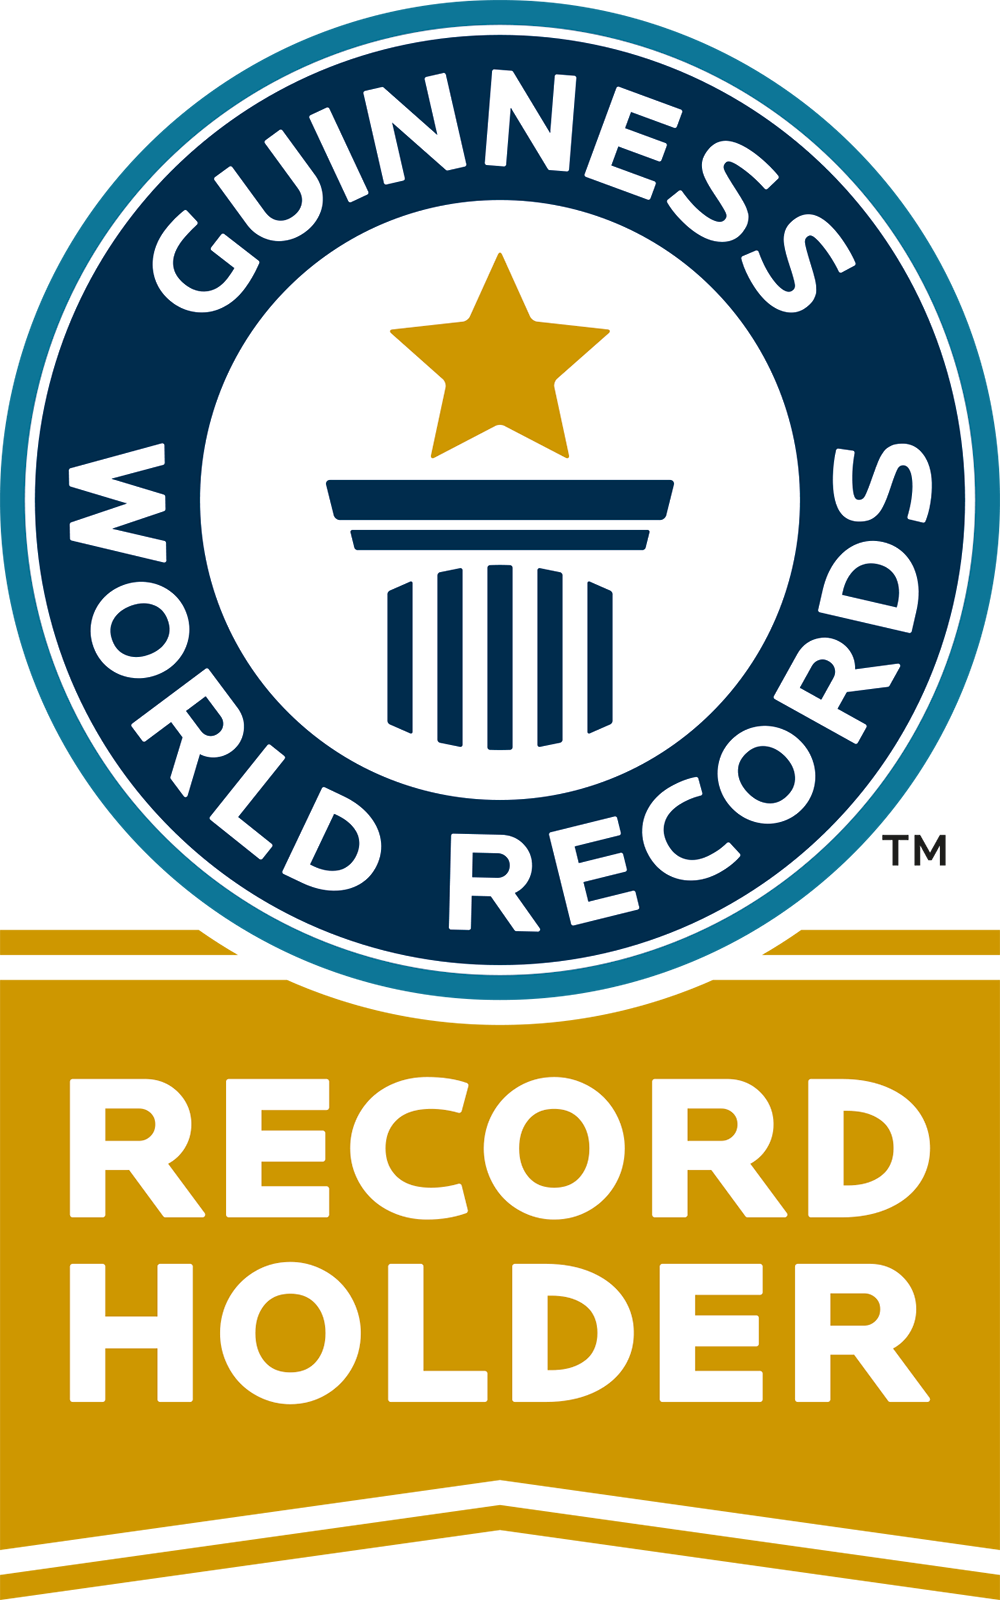 Guinness World Record Holder KnowBe4 